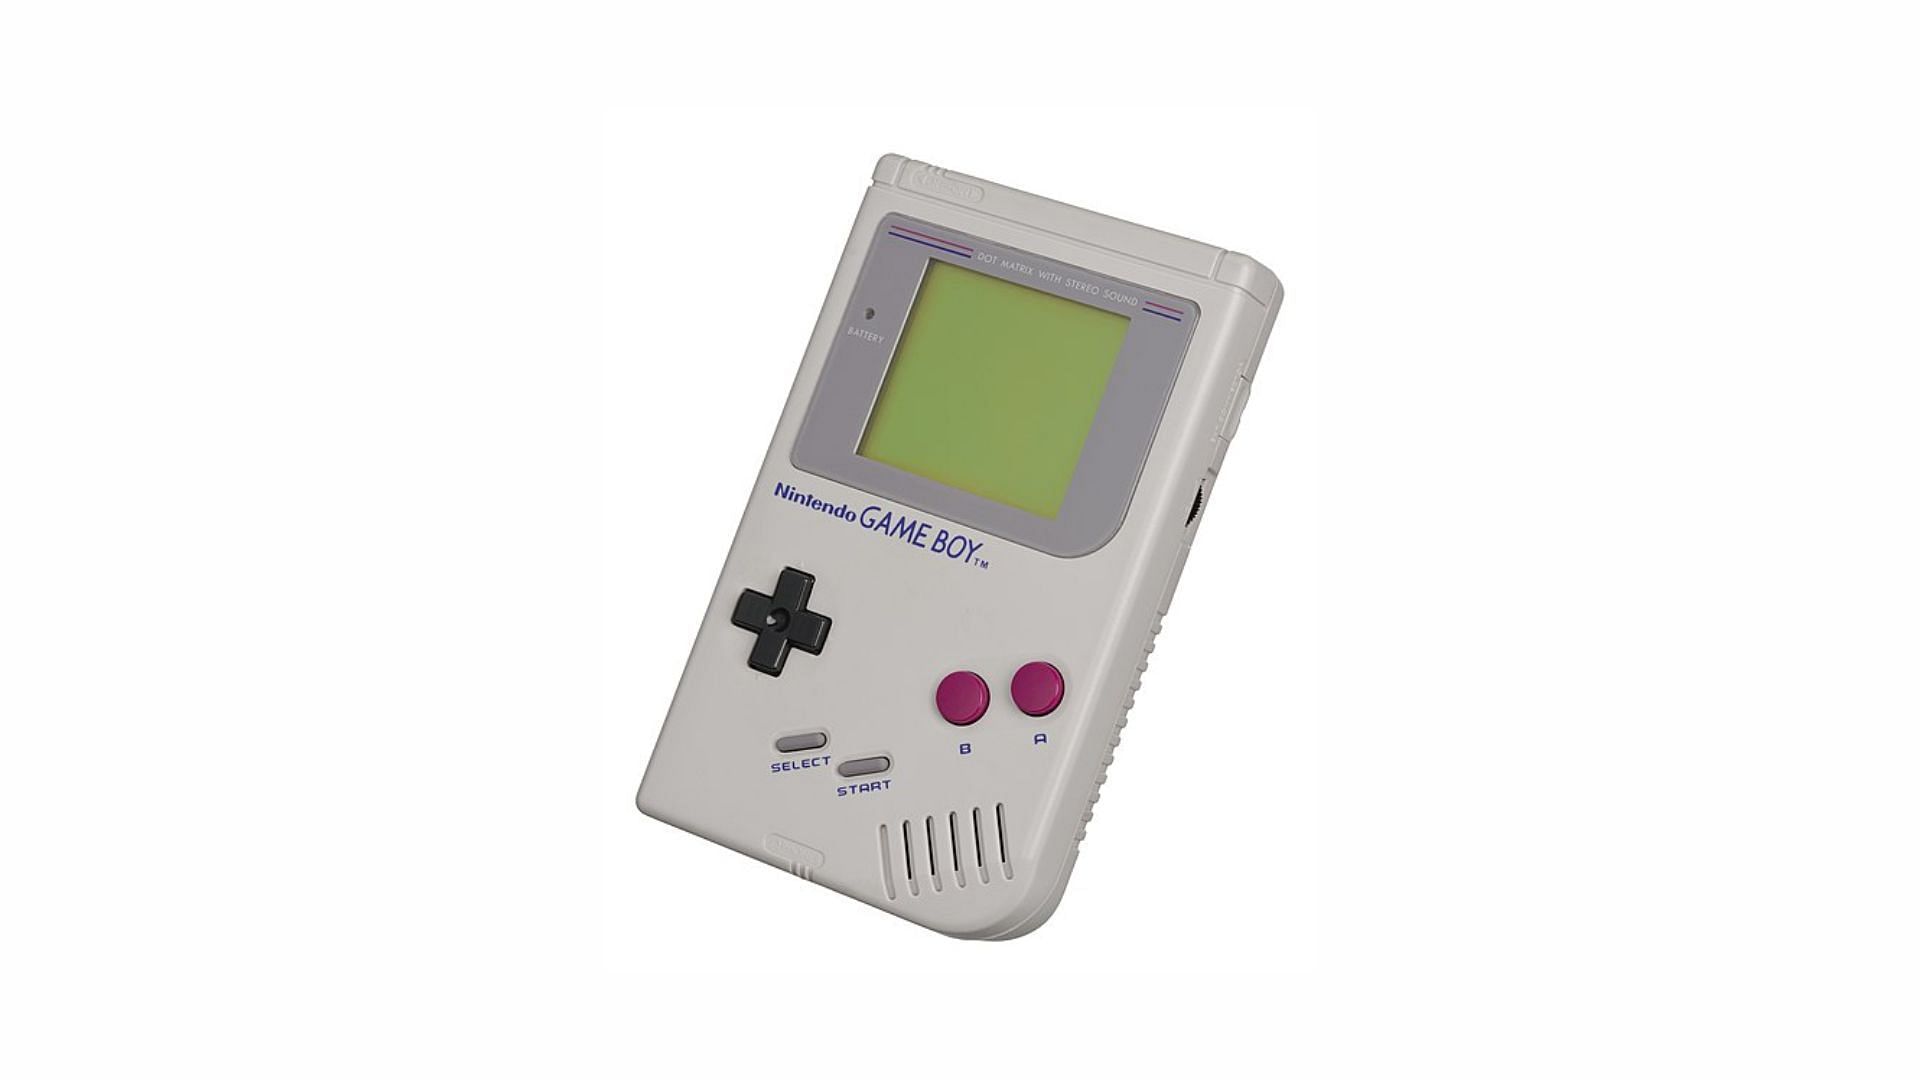 Game Boy popularized handheld gaming and became one of the highest-selling consoles of all time. (Image via Wikipedia)